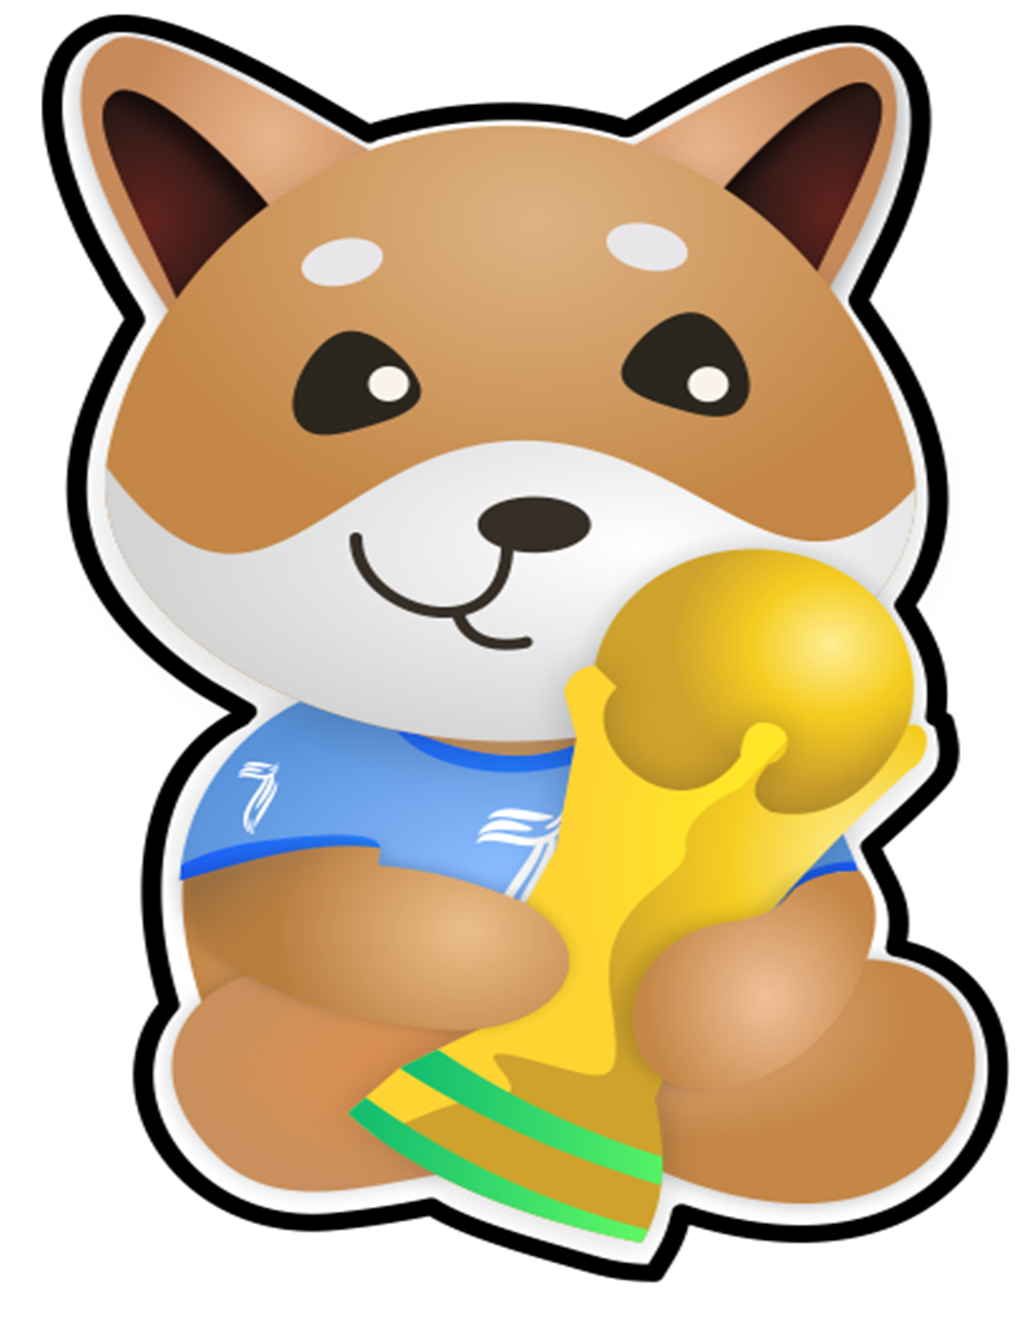 Safely betting and earning crypto during Worldcup 2022 via WorldCupDoge!